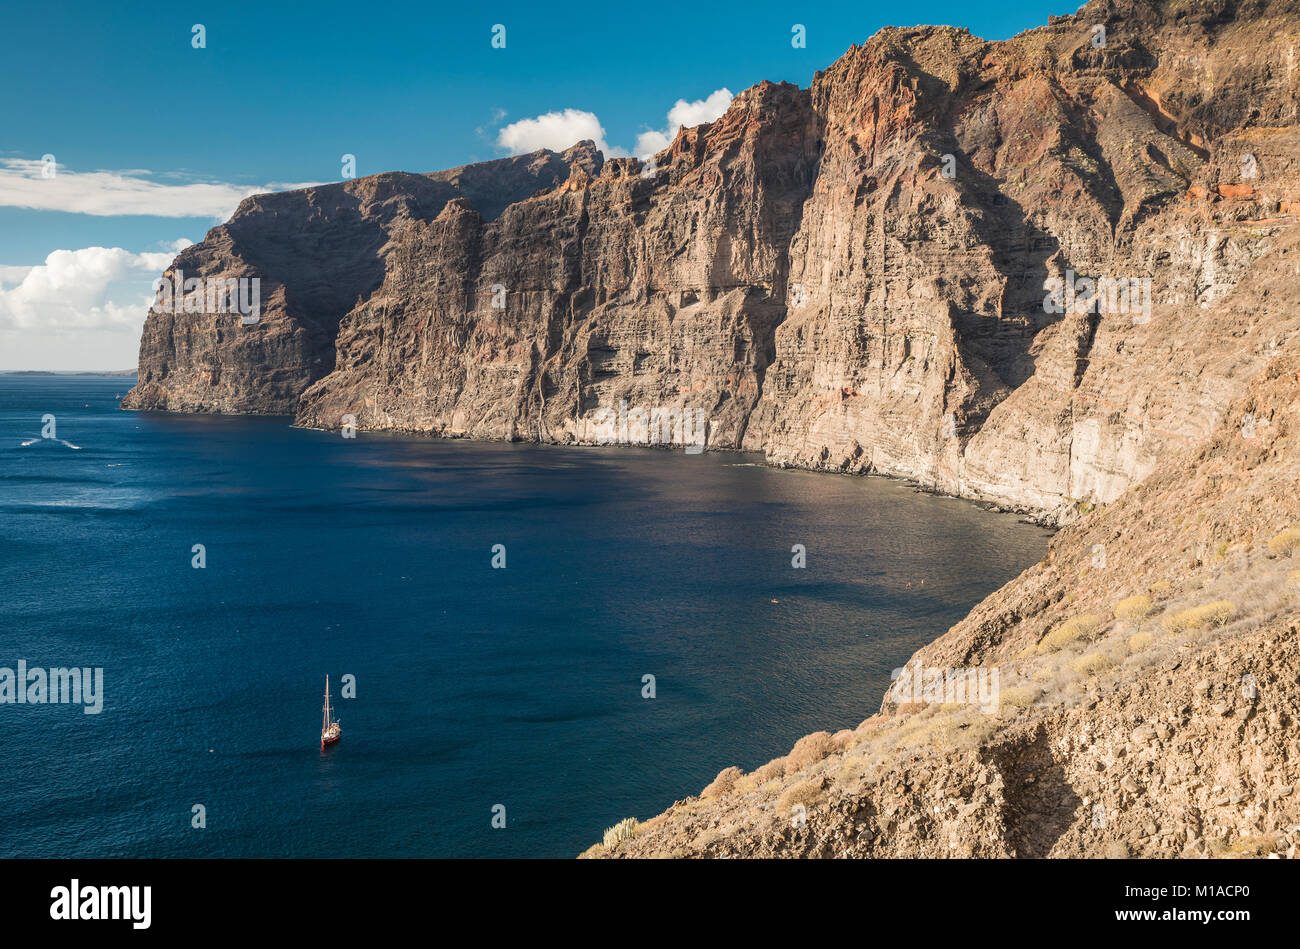 The huge cliffs of mafic lava flows cut by numerous dykes at Los Gigantes, Tenerife, Canary Islands, Spain Stock Photo